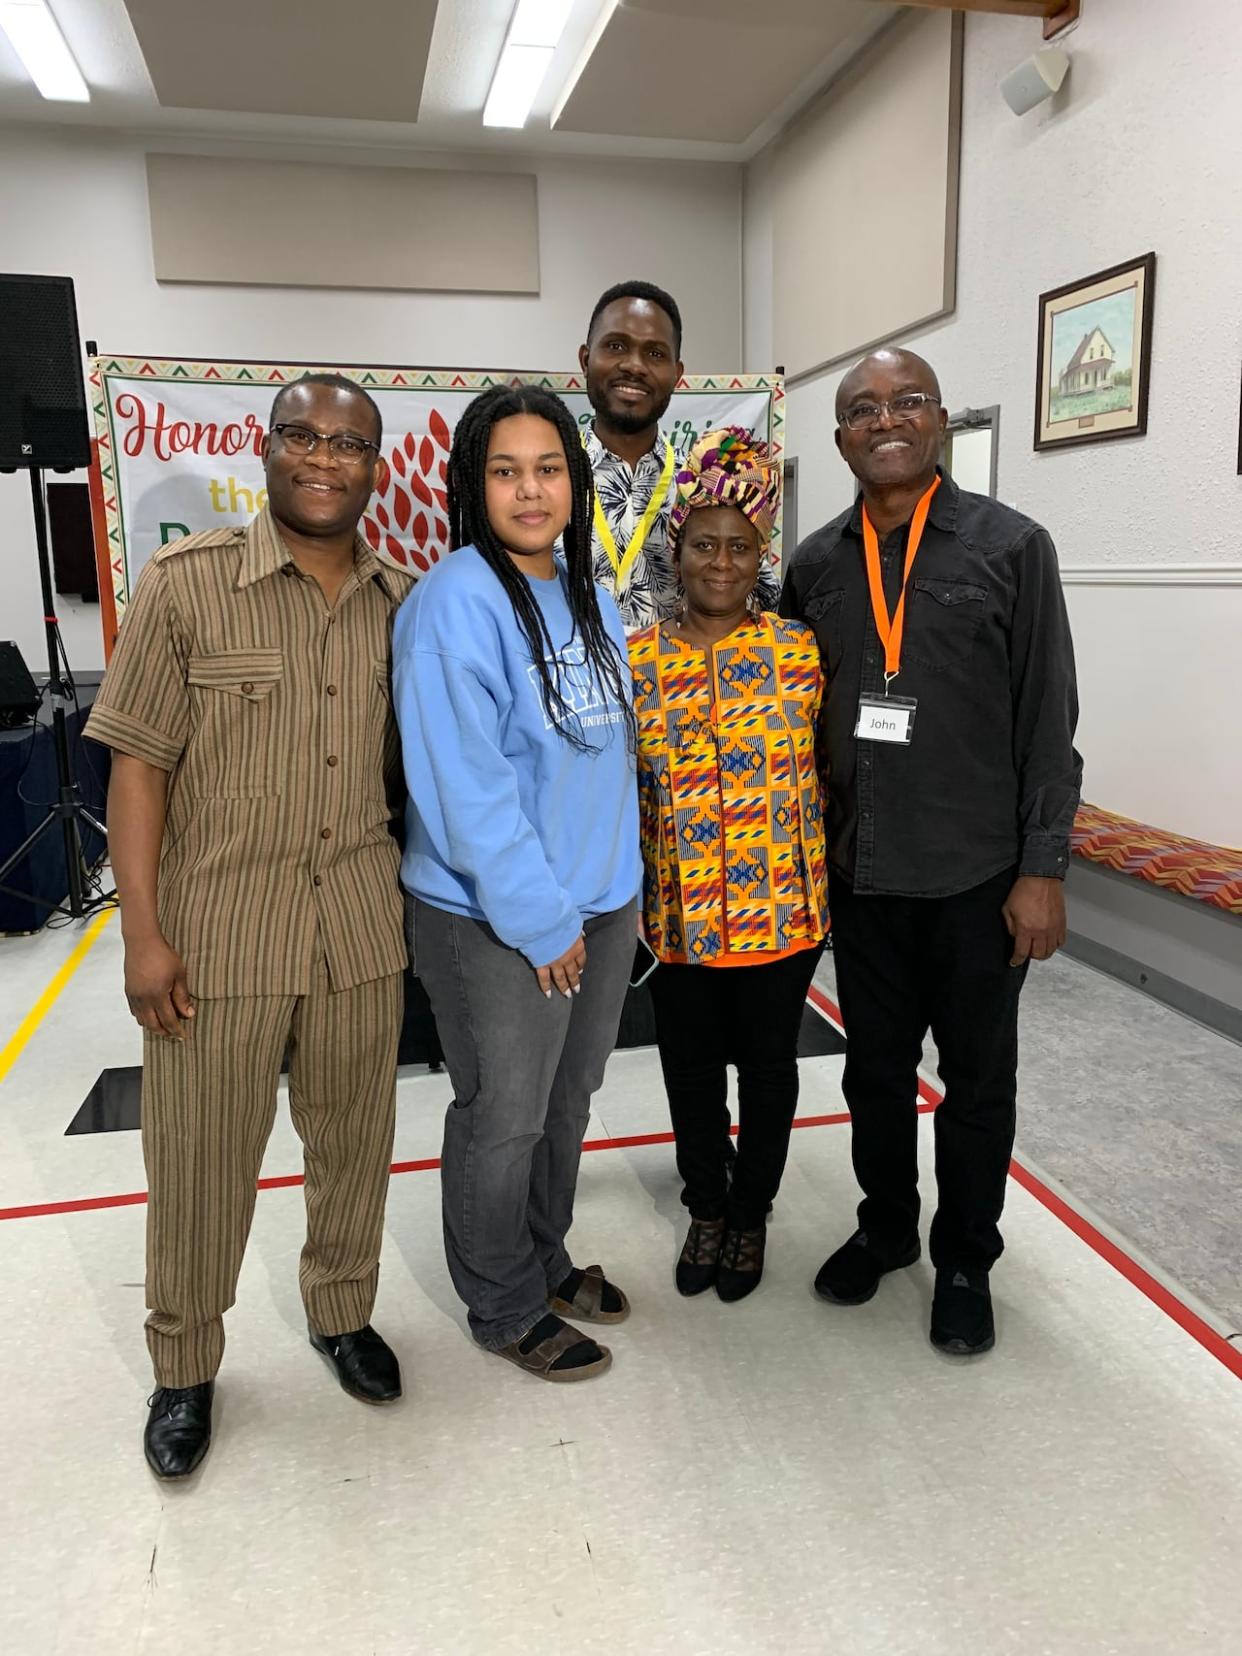 It was a historic milestone as the Black Impact Alliance Foundation of Beaumont celebrated Black History Month for the first time over the weekend. For community members, it was a triumphant show of culture, history and solidarity. (Jamie McCannel/CBC - image credit)